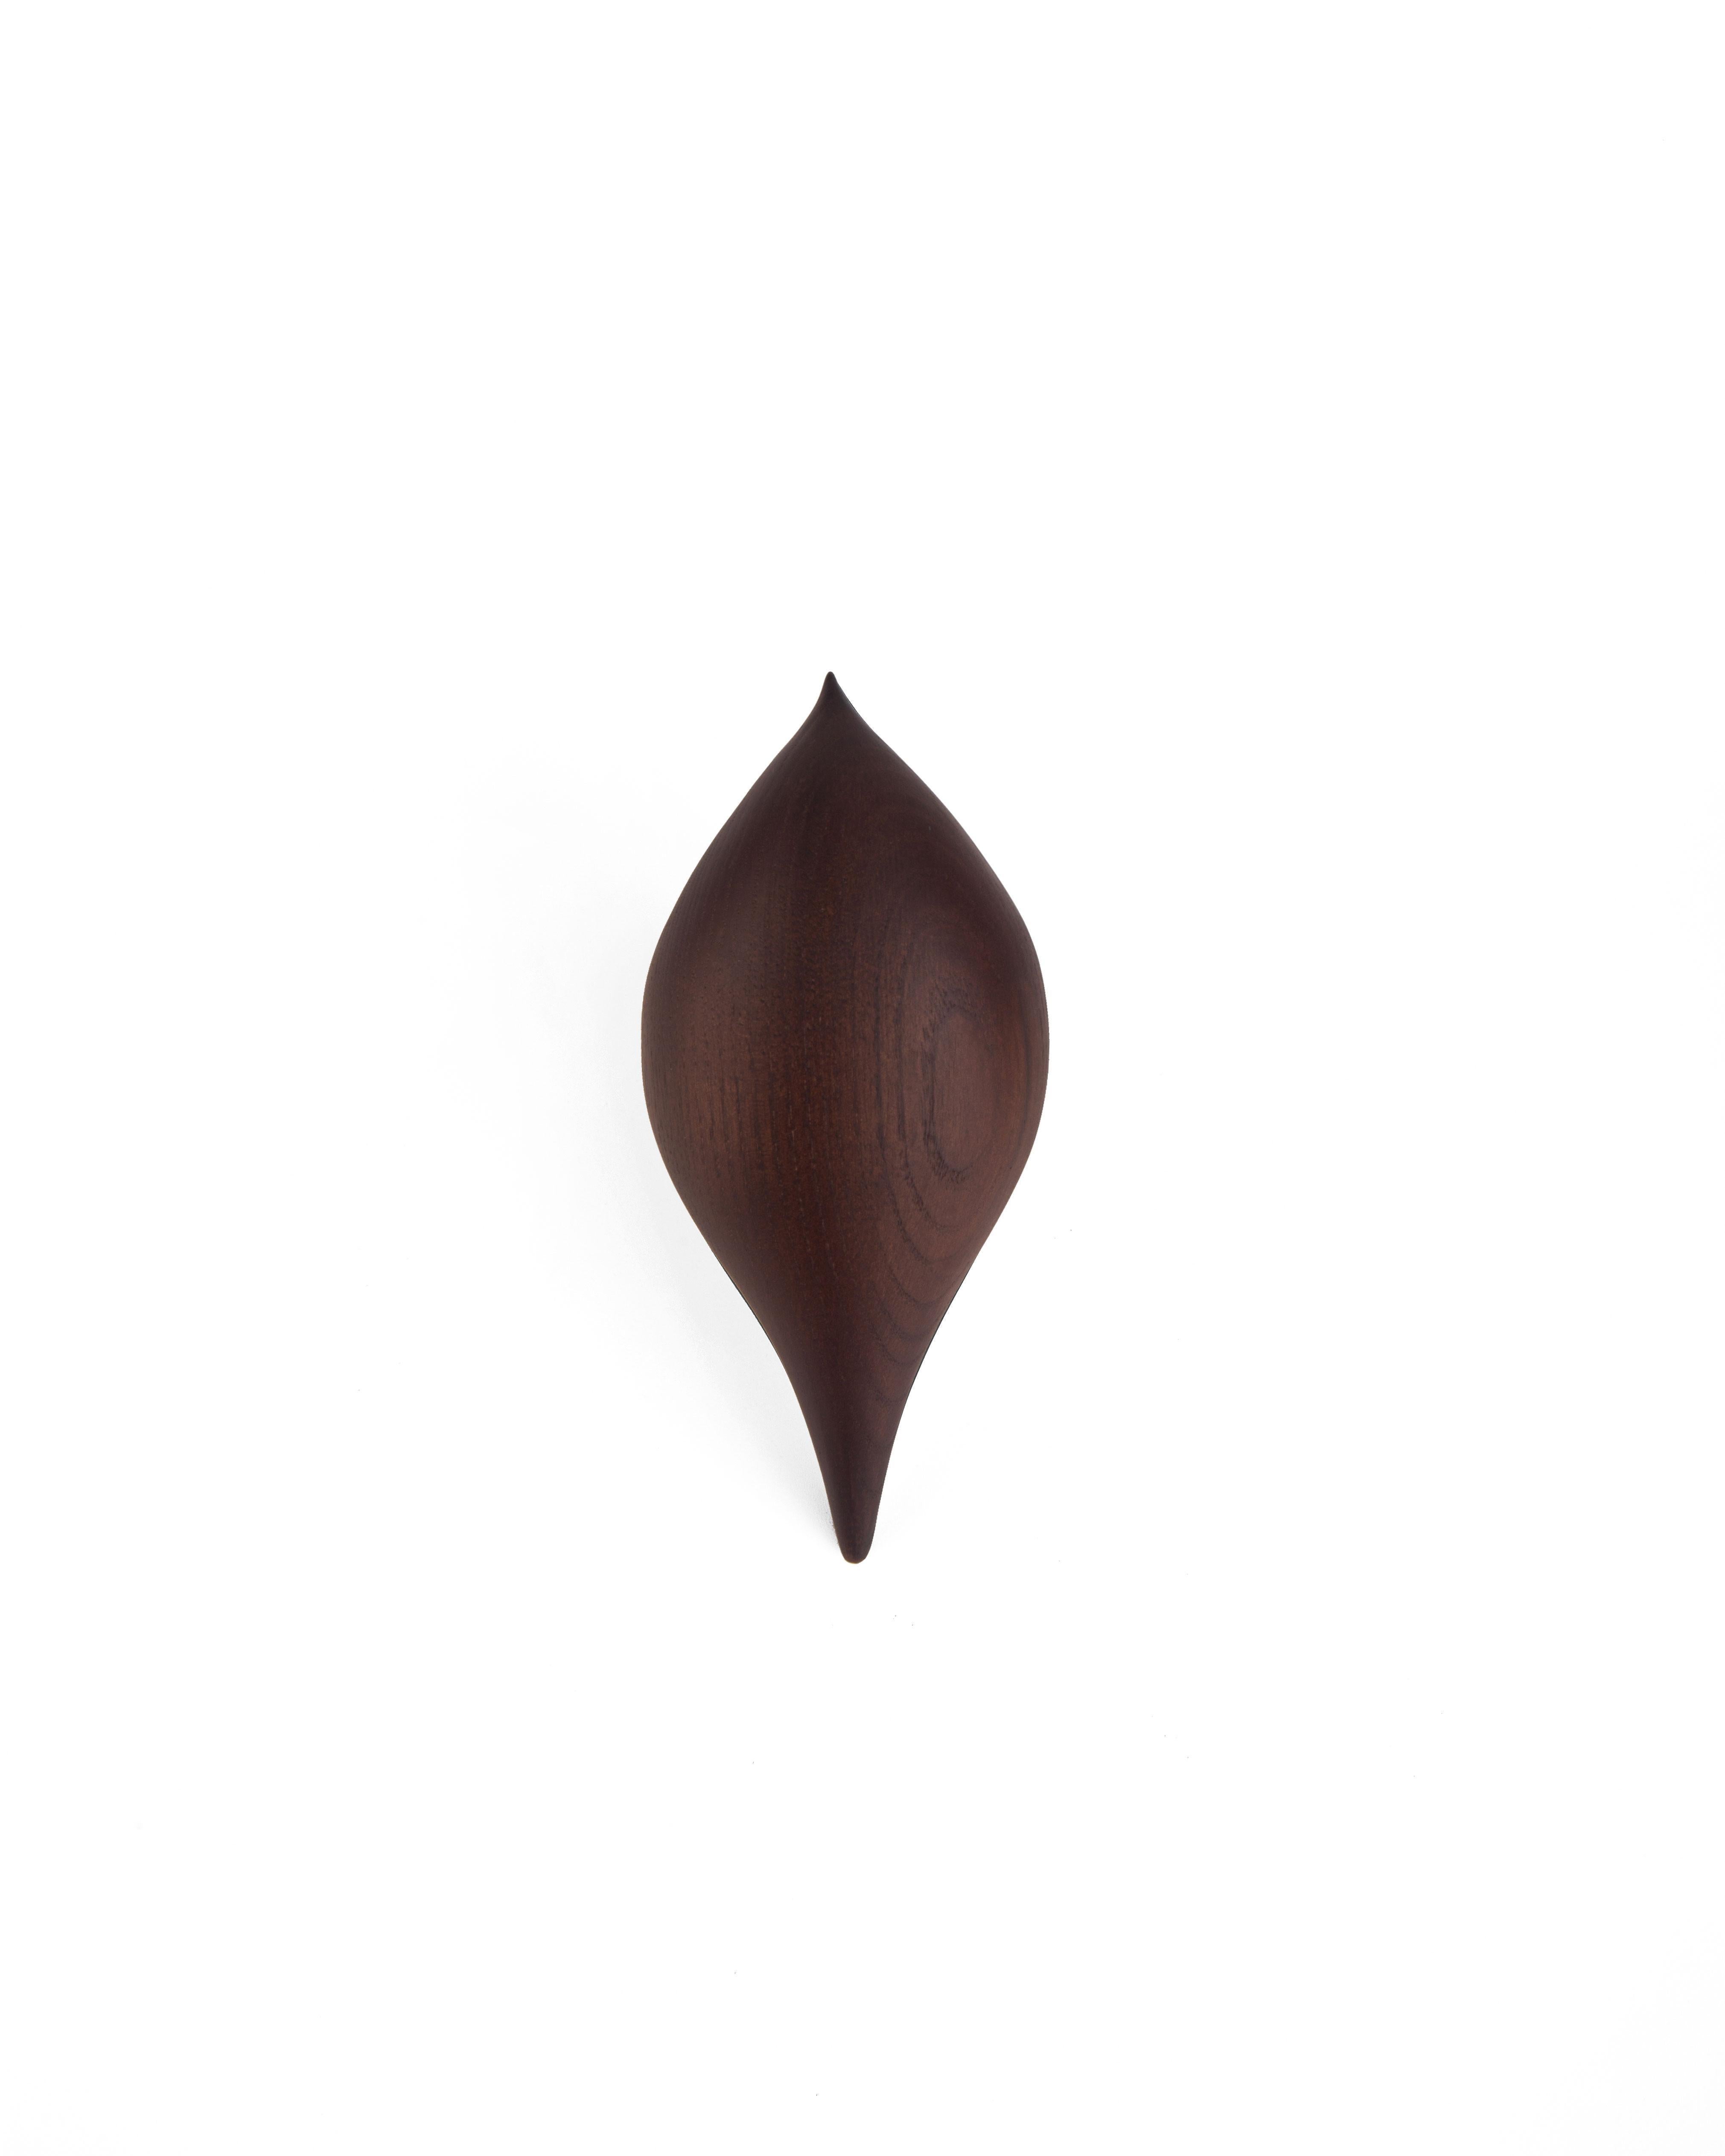 Contemporay Tweety Decorative Bird CS2 by Noom, Brown Ashwood, In stock For Sale 5